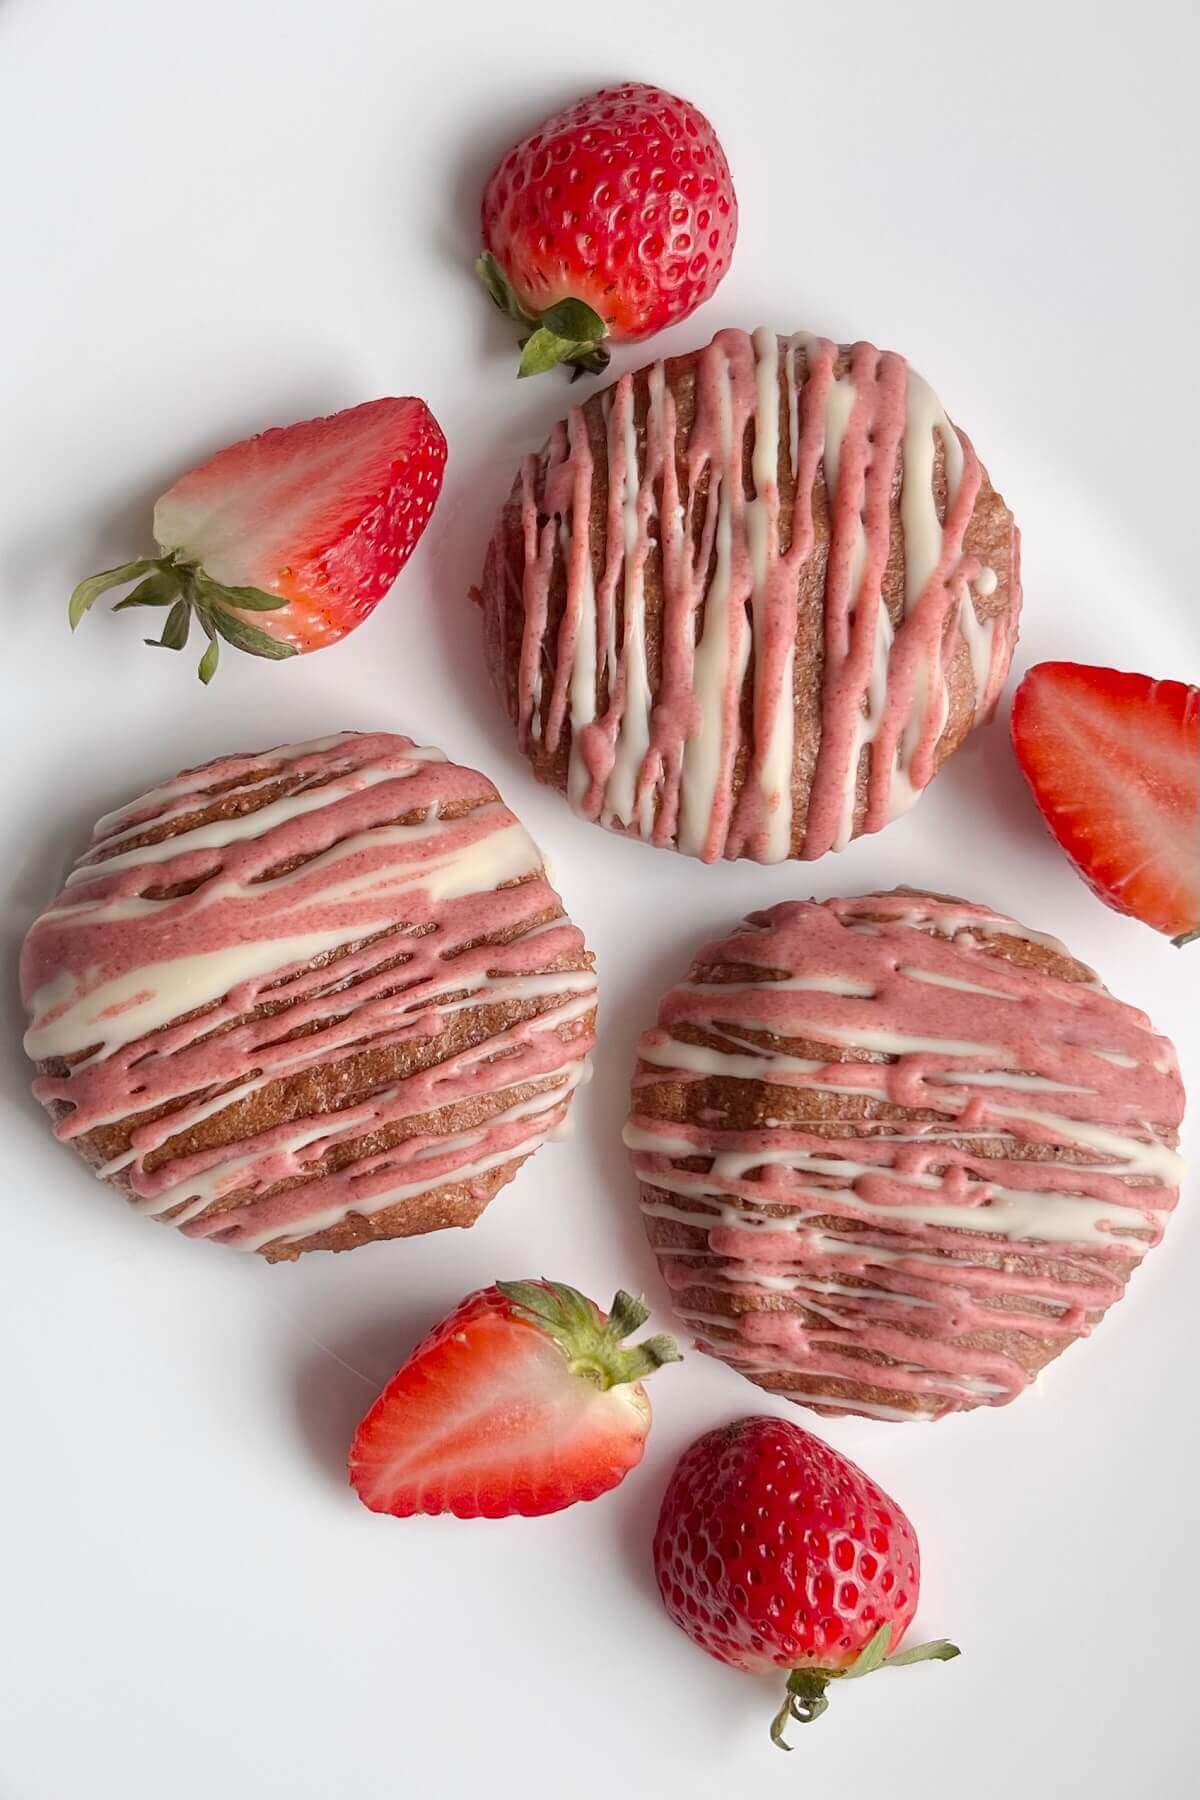 Cookies and strawberries on a white plate.